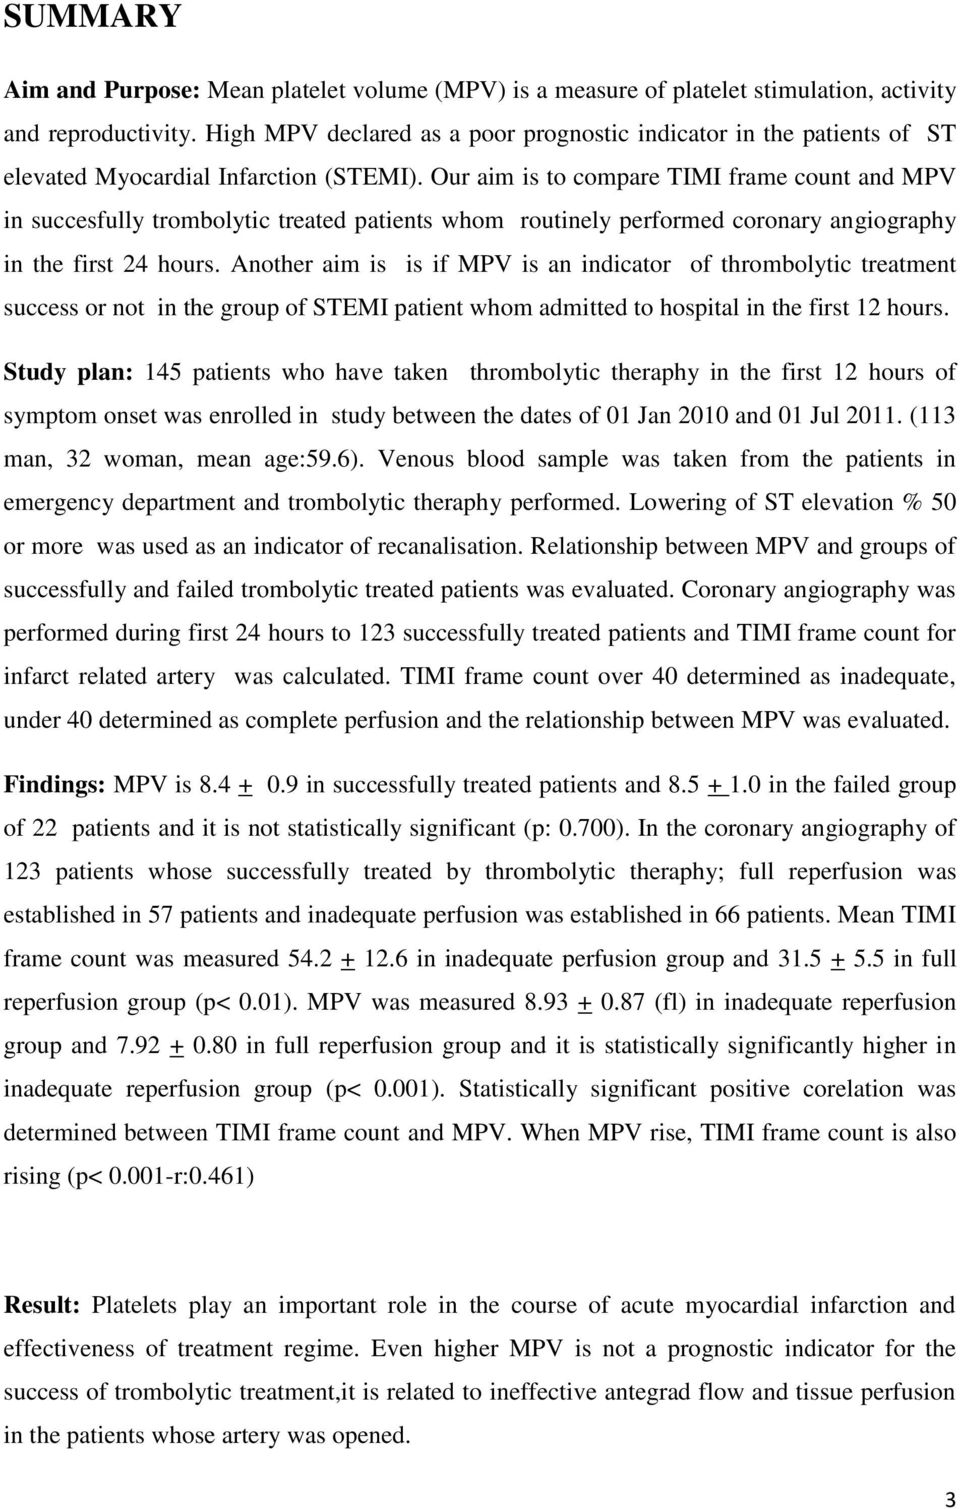 Our aim is to compare TIMI frame count and MPV in succesfully trombolytic treated patients whom routinely performed coronary angiography in the first 24 hours.